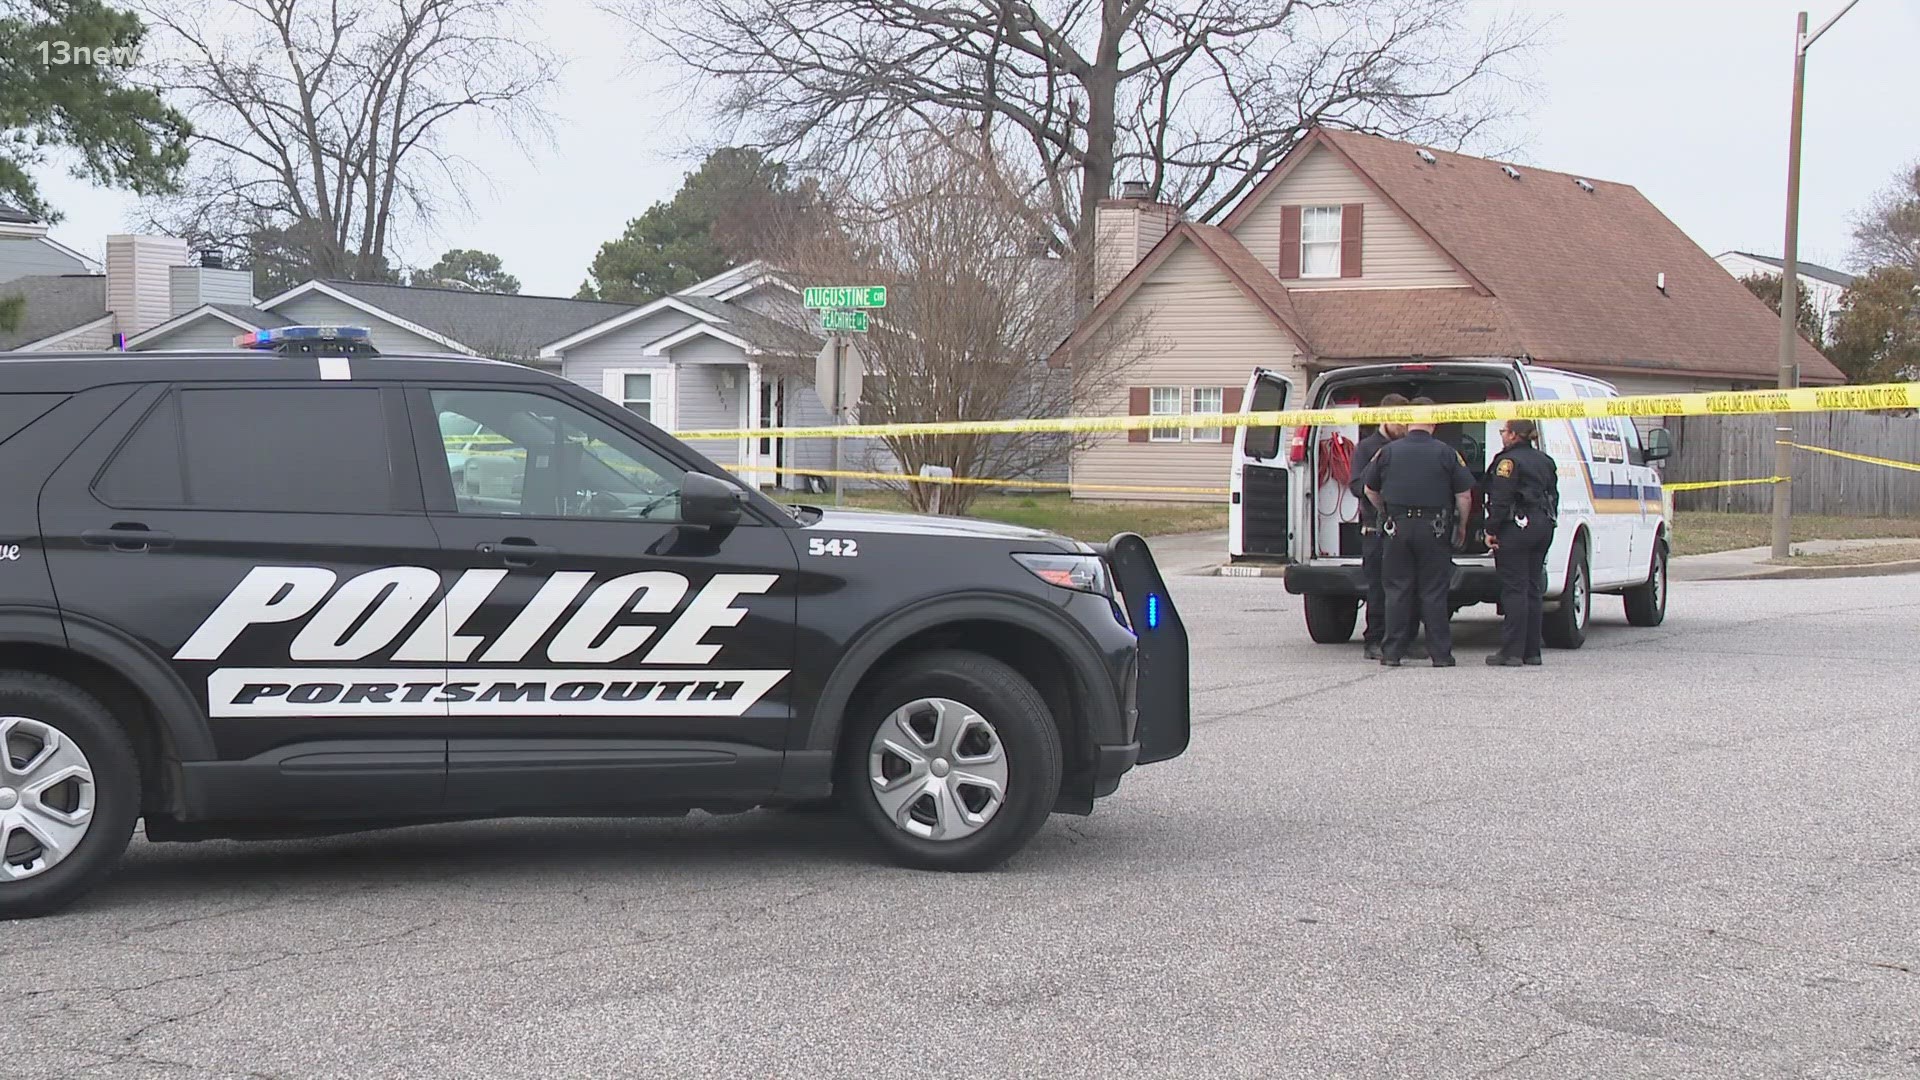 Portsmouth police are investigating two shootings that happened just miles and minutes apart on Friday.